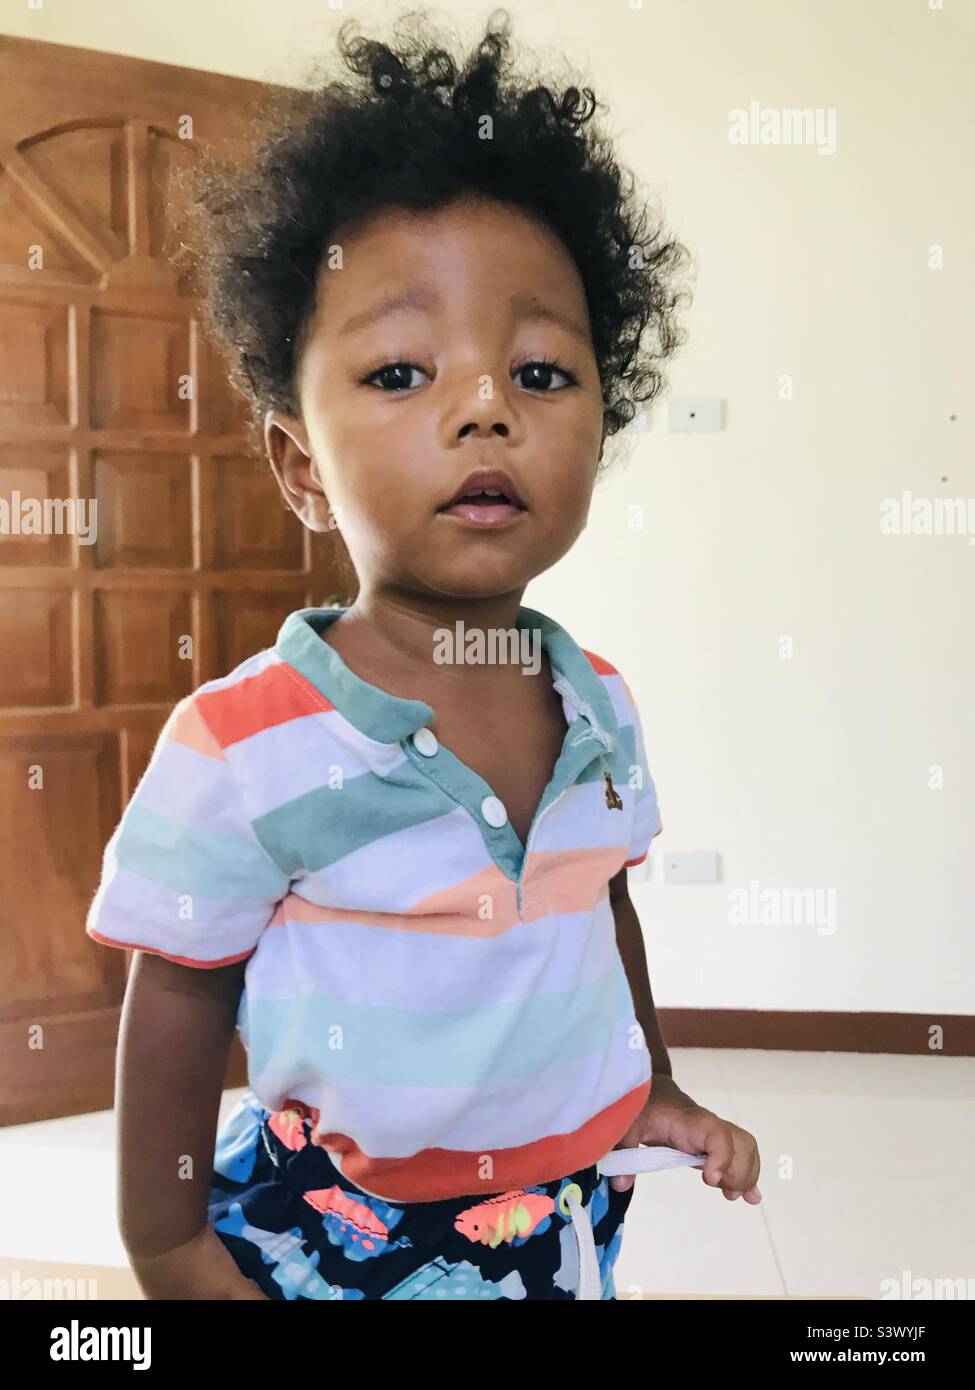 Filipino mixed race, mestizo, African American toddler with colorful shirt posing for the camera Stock Photo